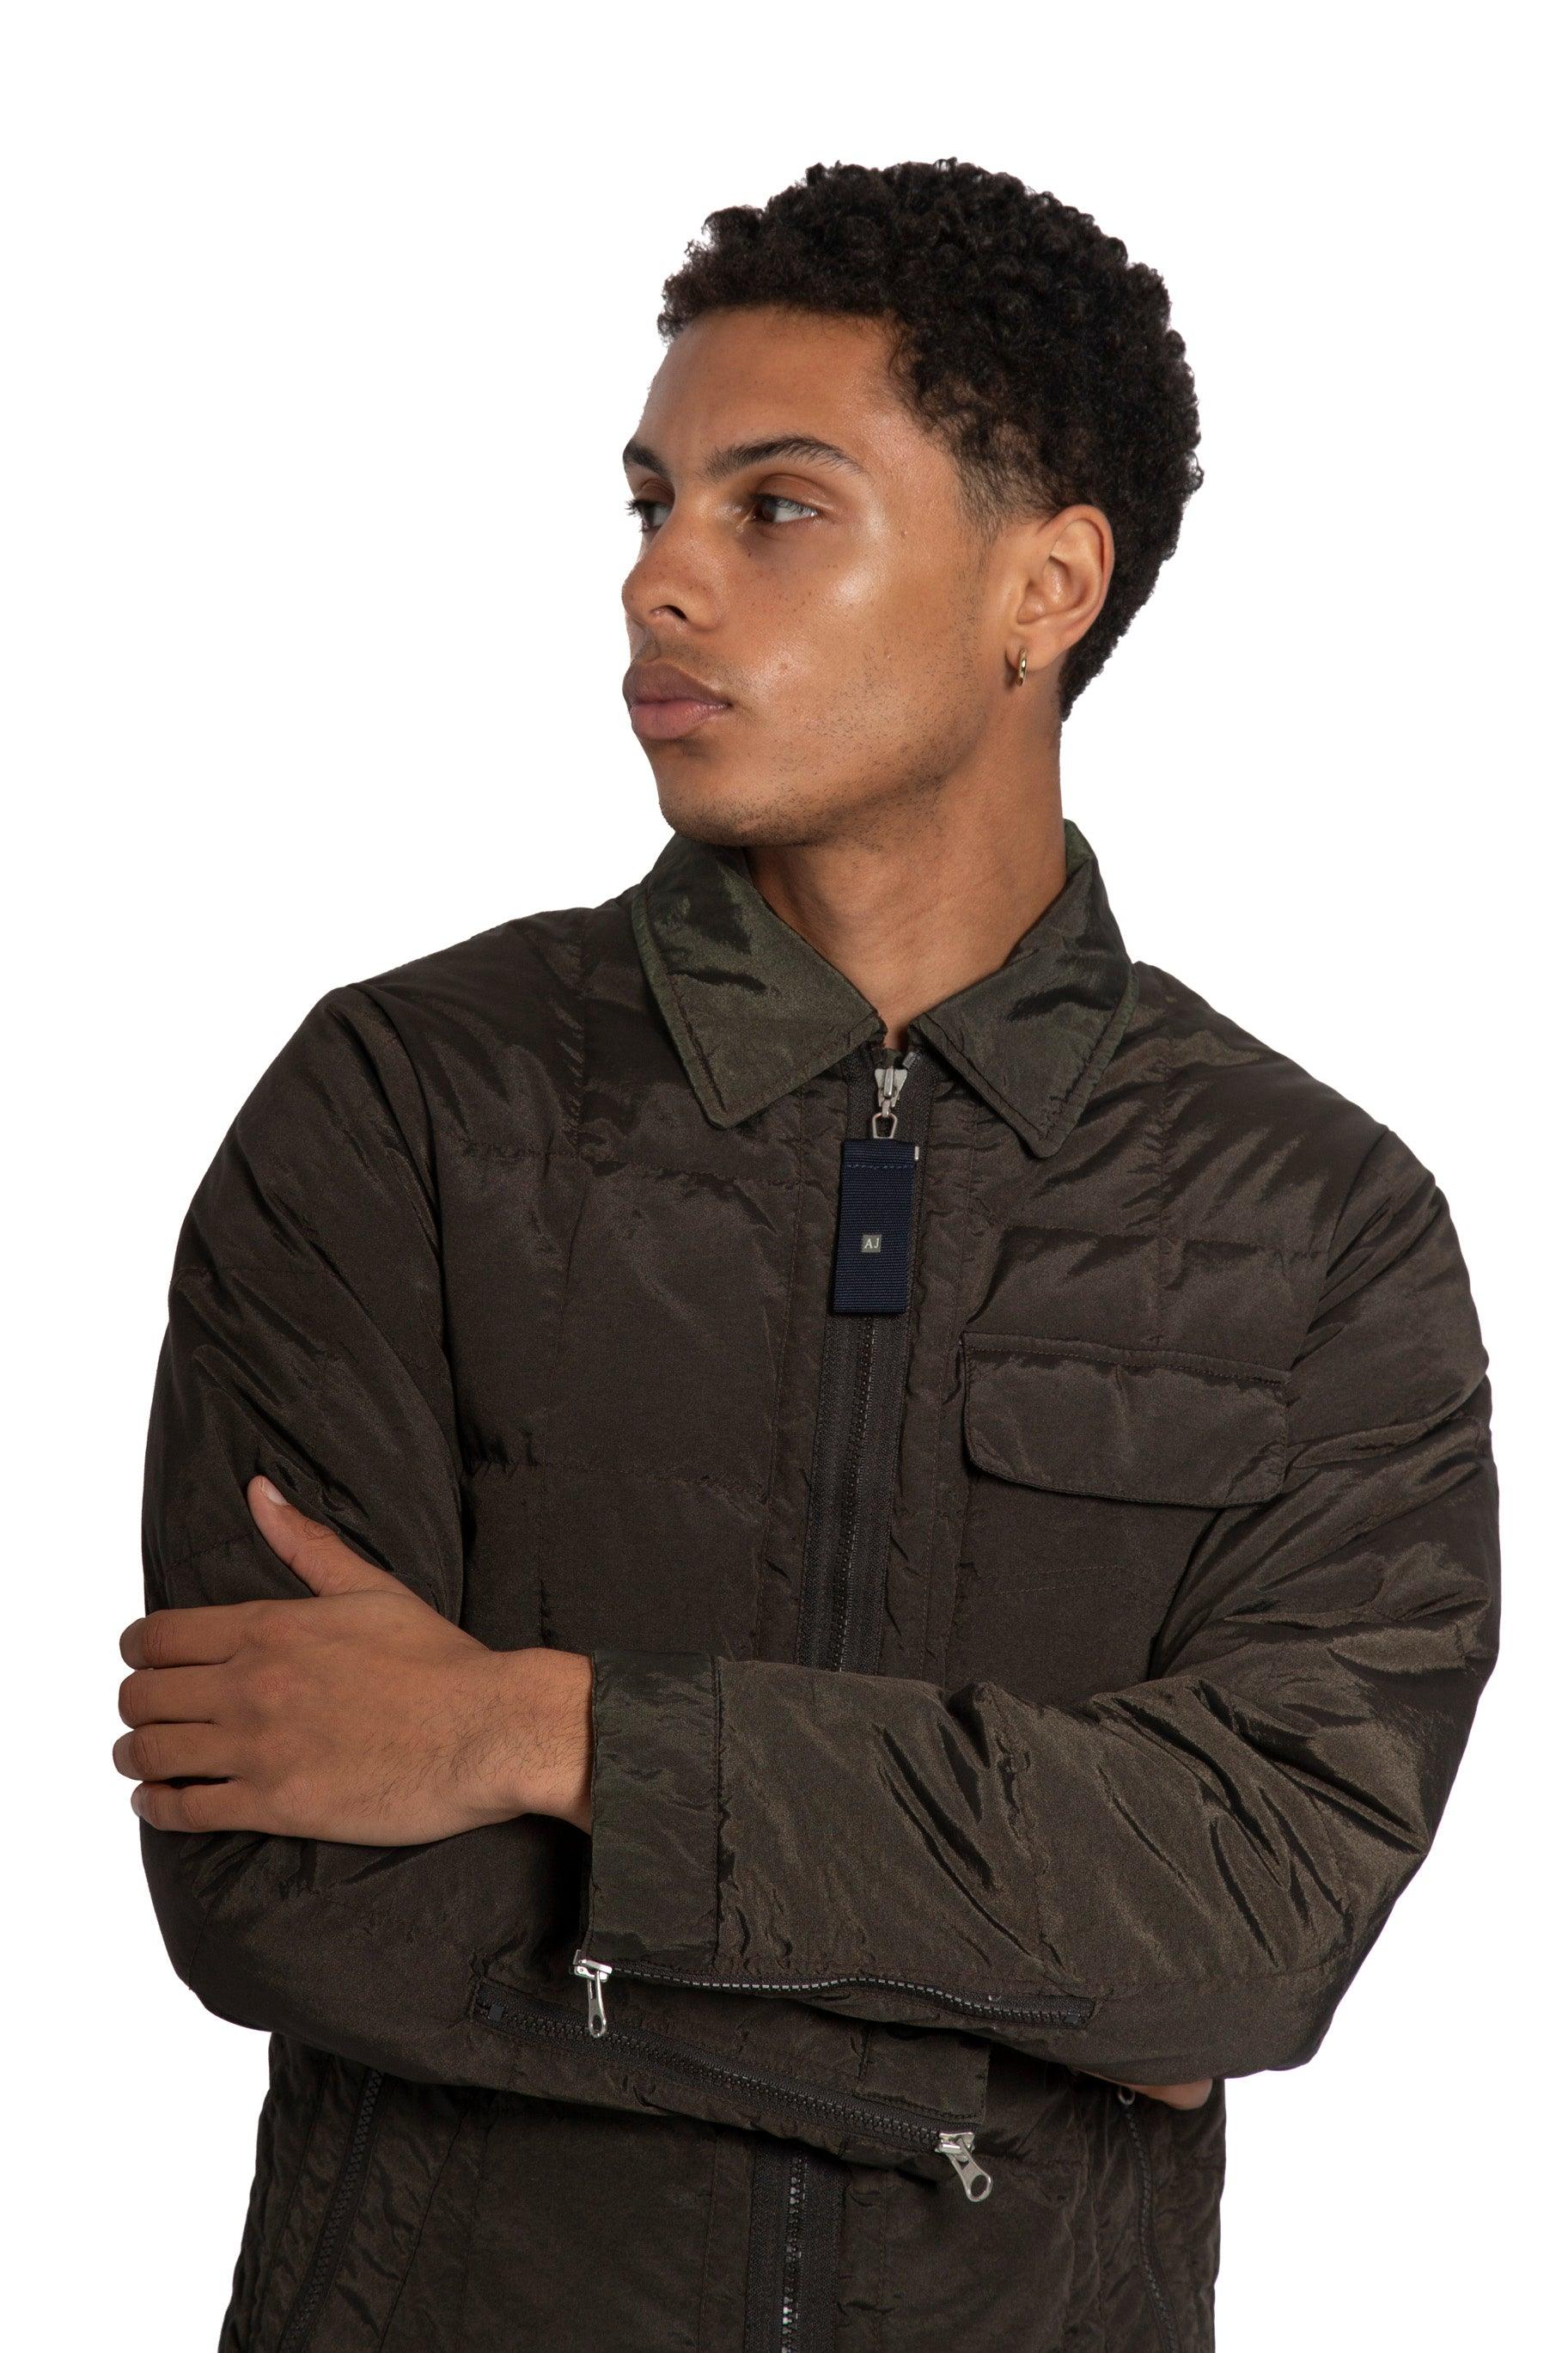 Armani Jeans Iridescent Tech Jacket - Known Source